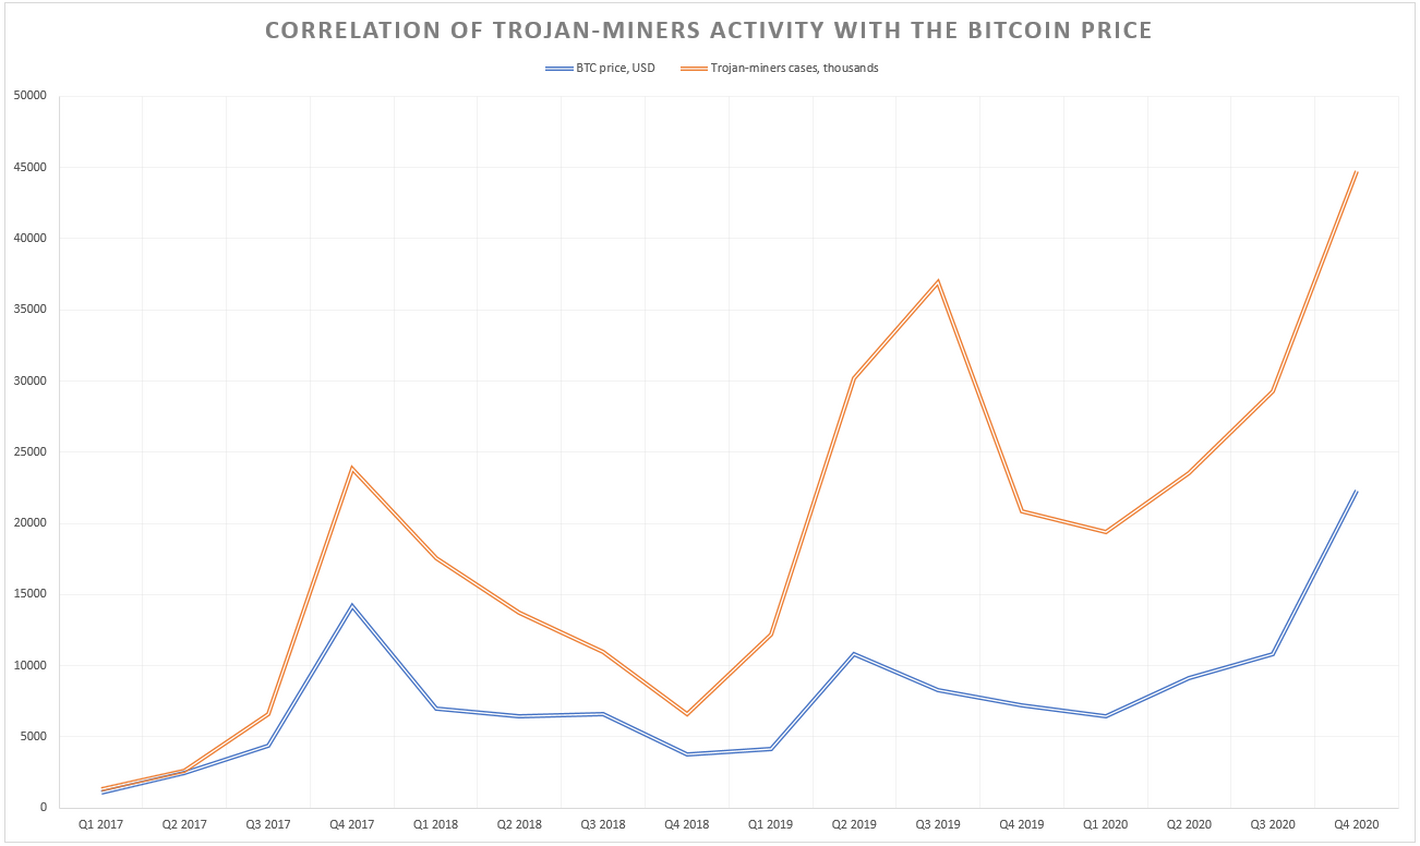 Graphic of coin miners activity and Bitcoin price